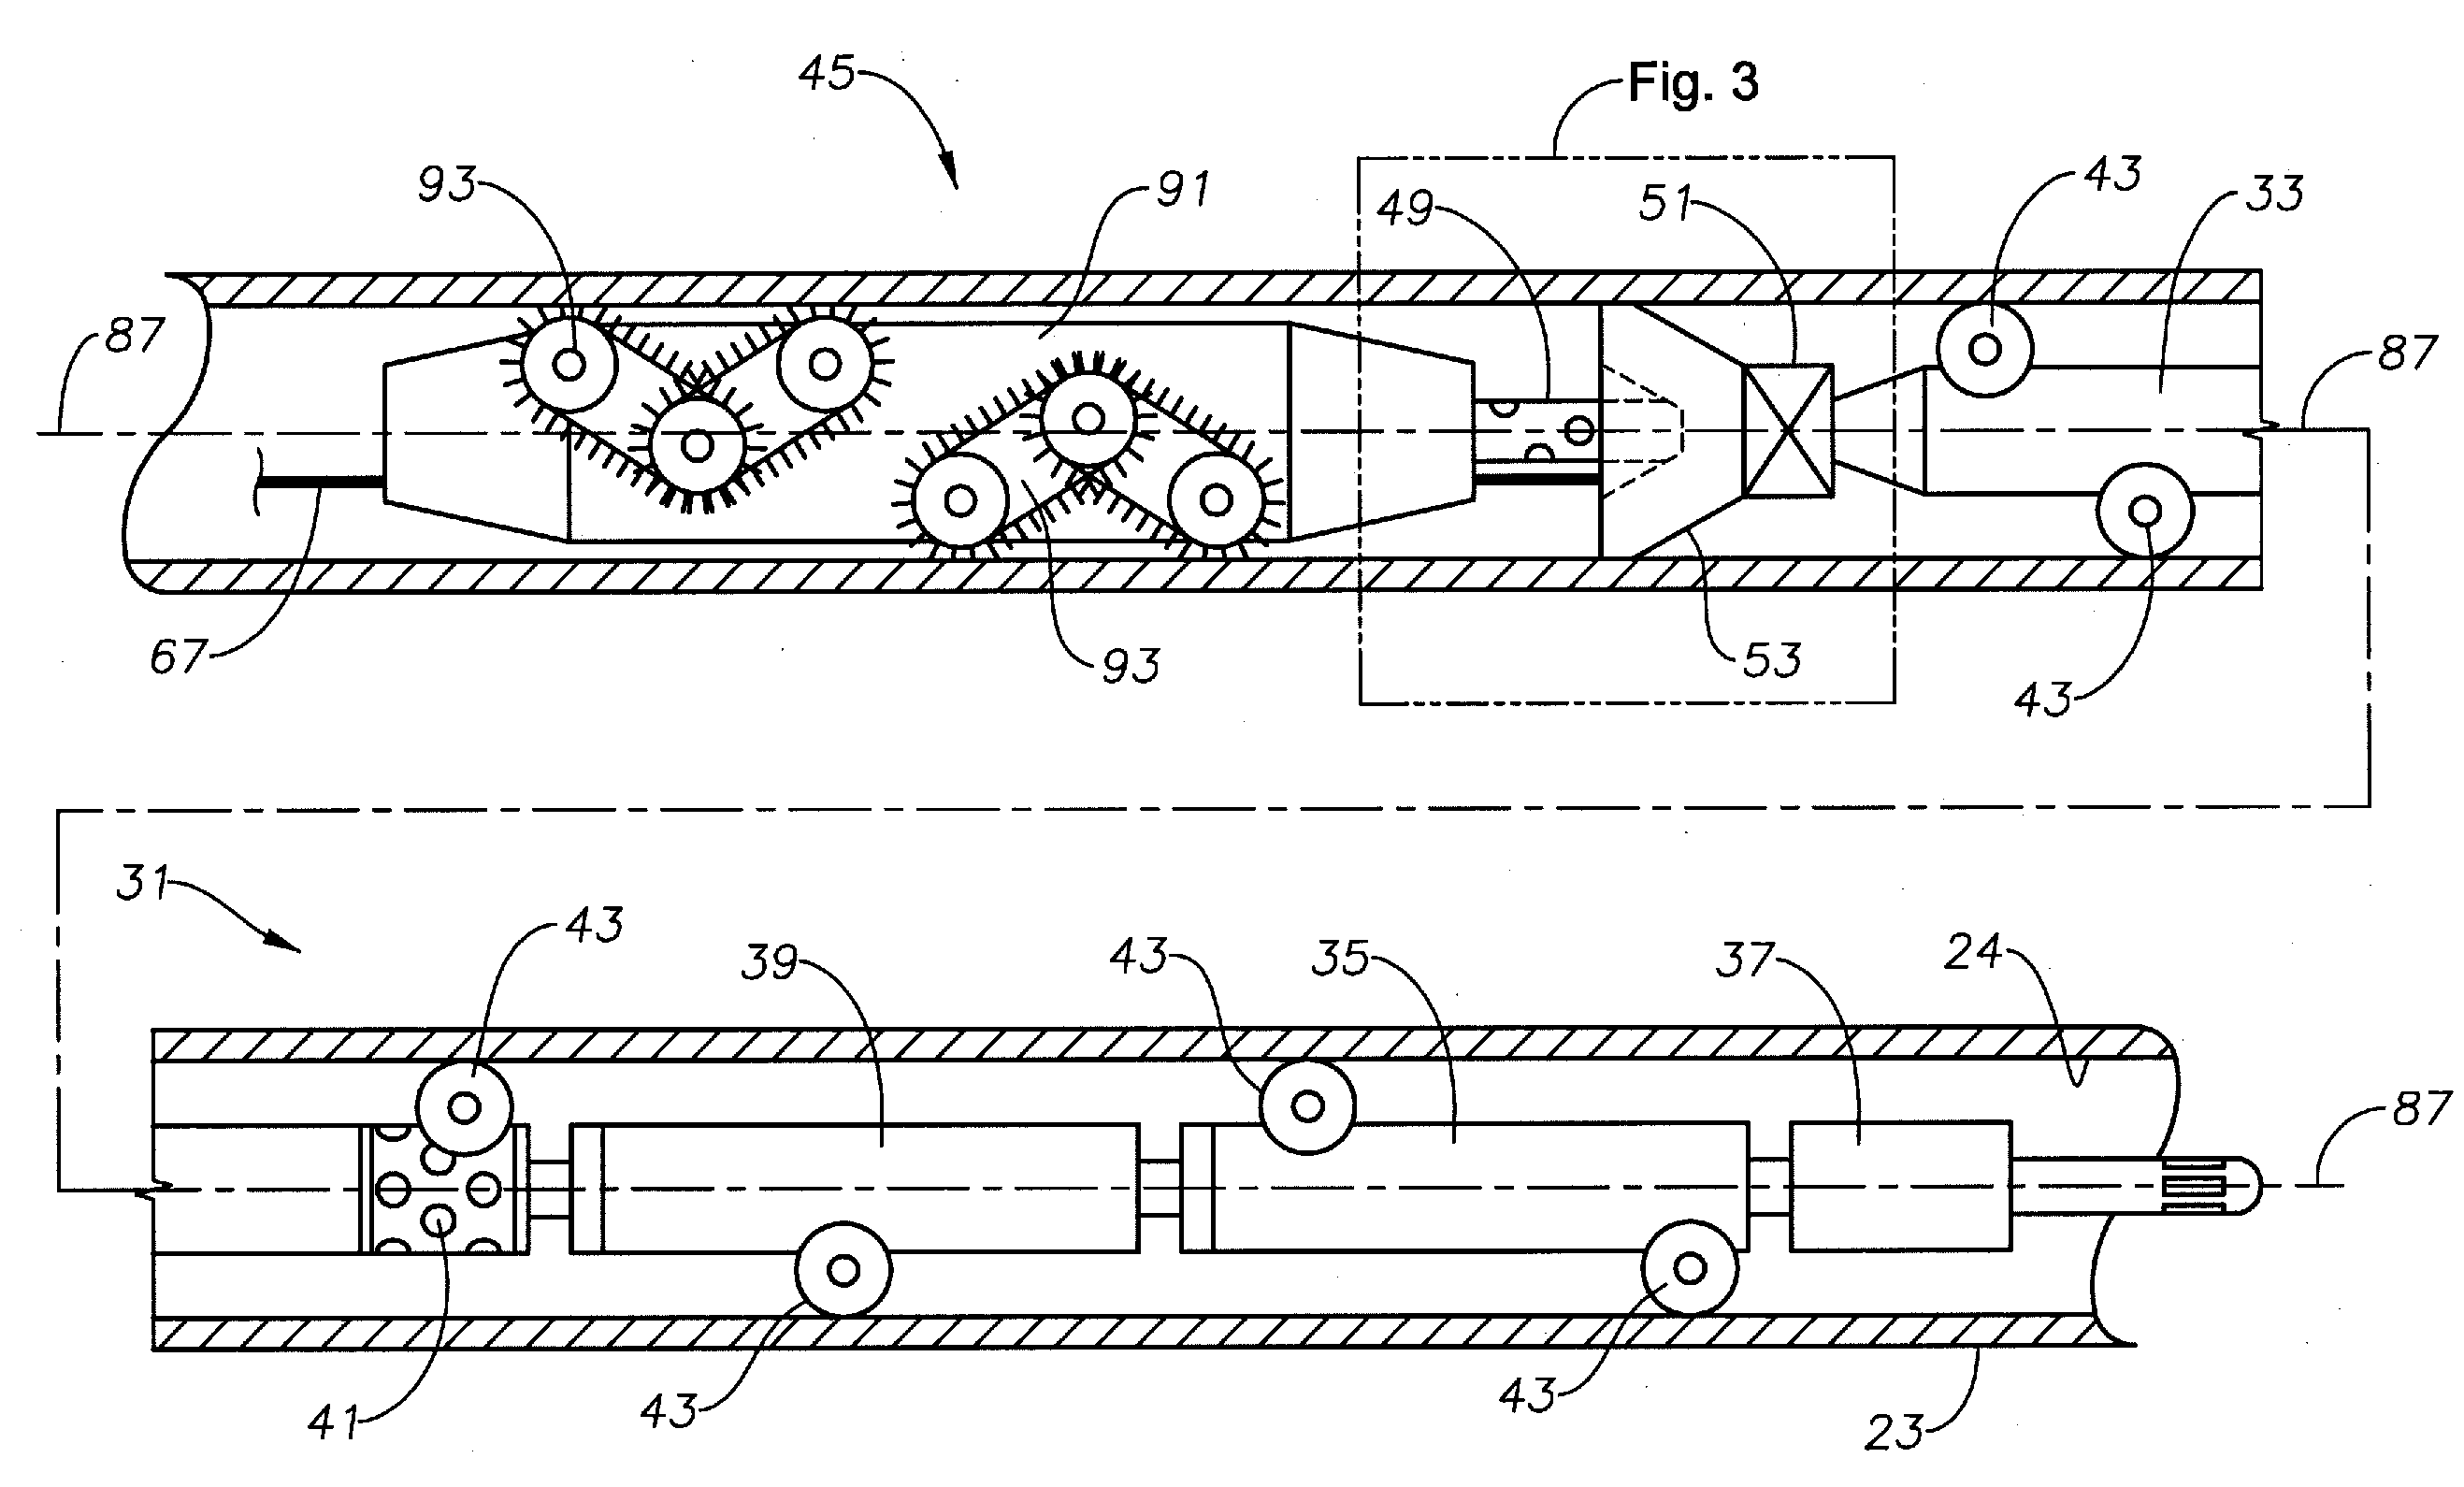 Hydraulic assist deployment system for artificial lift systems and methods for using the same